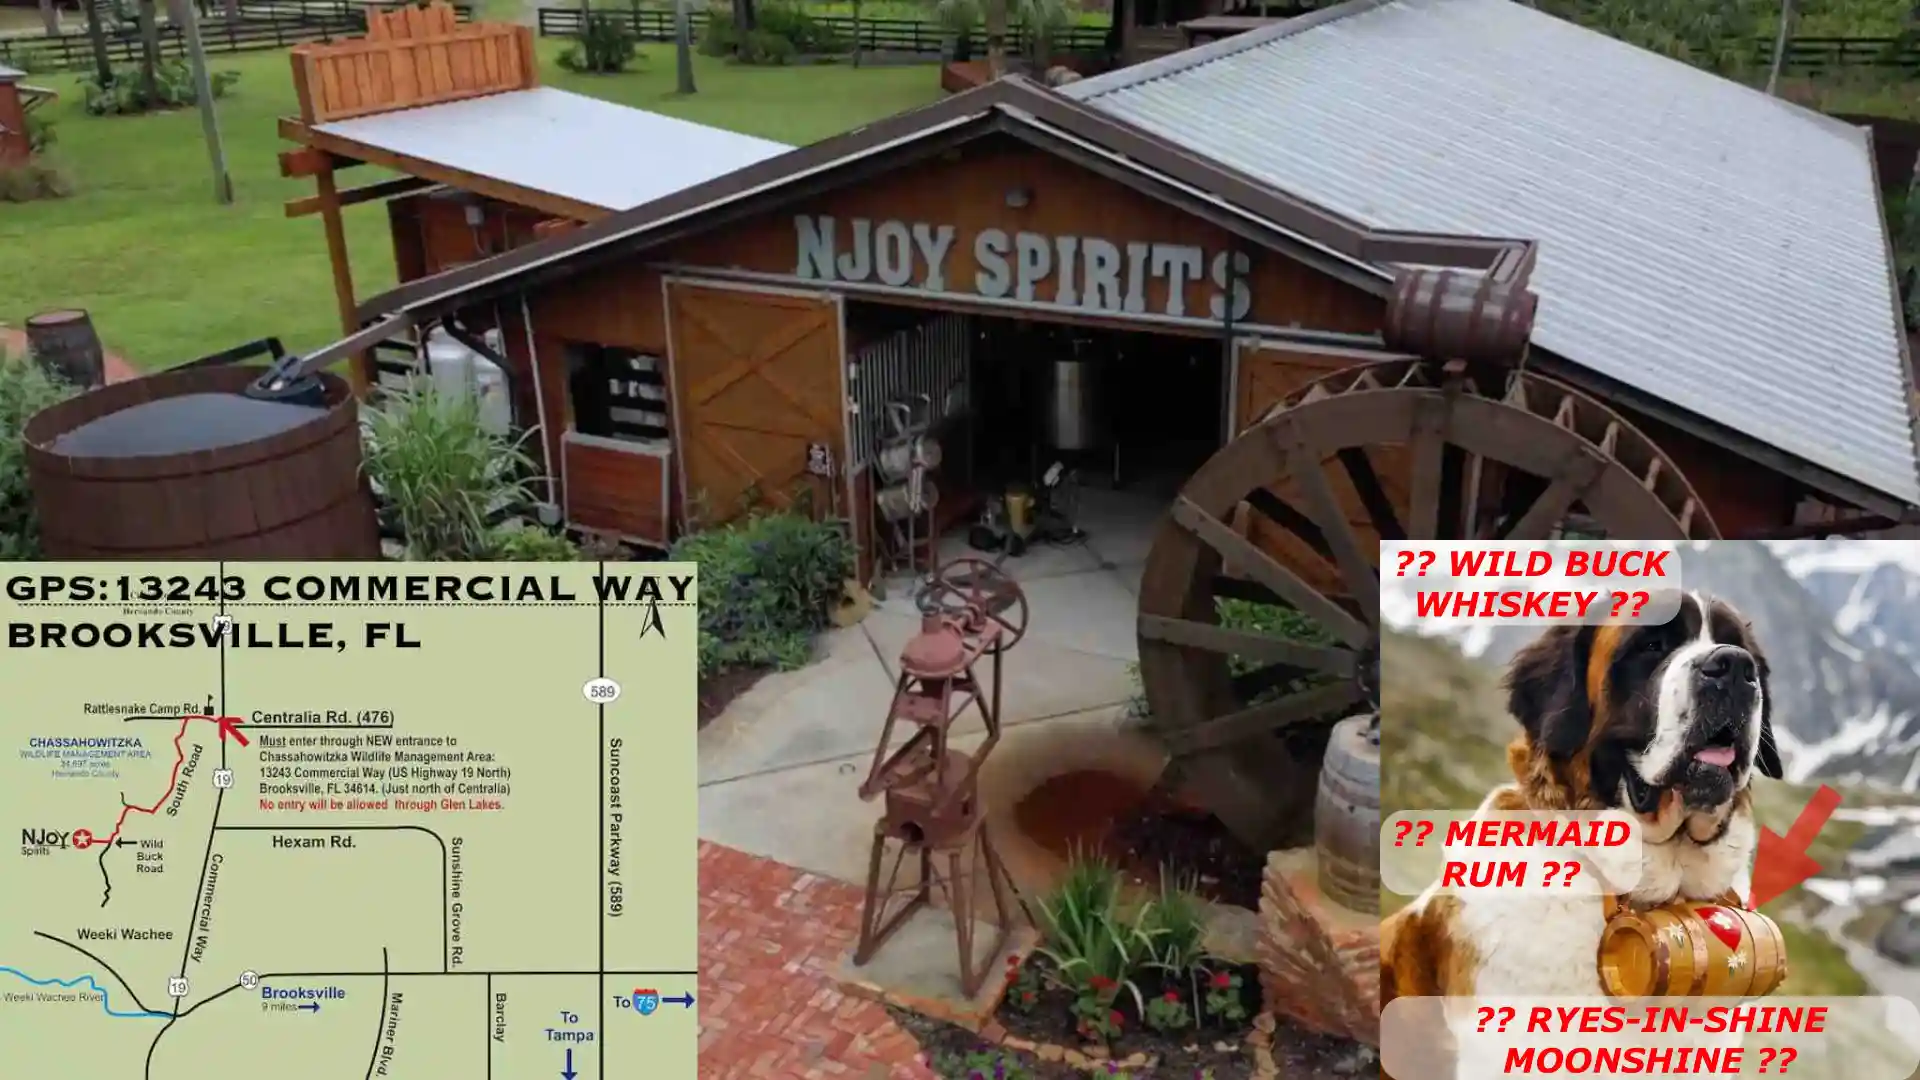 EVENT - 20210911-12 - NJOY DISTILLERY BARN ARIAL + MAP + NATIONAL FIRST-AID DAY WEEKEND